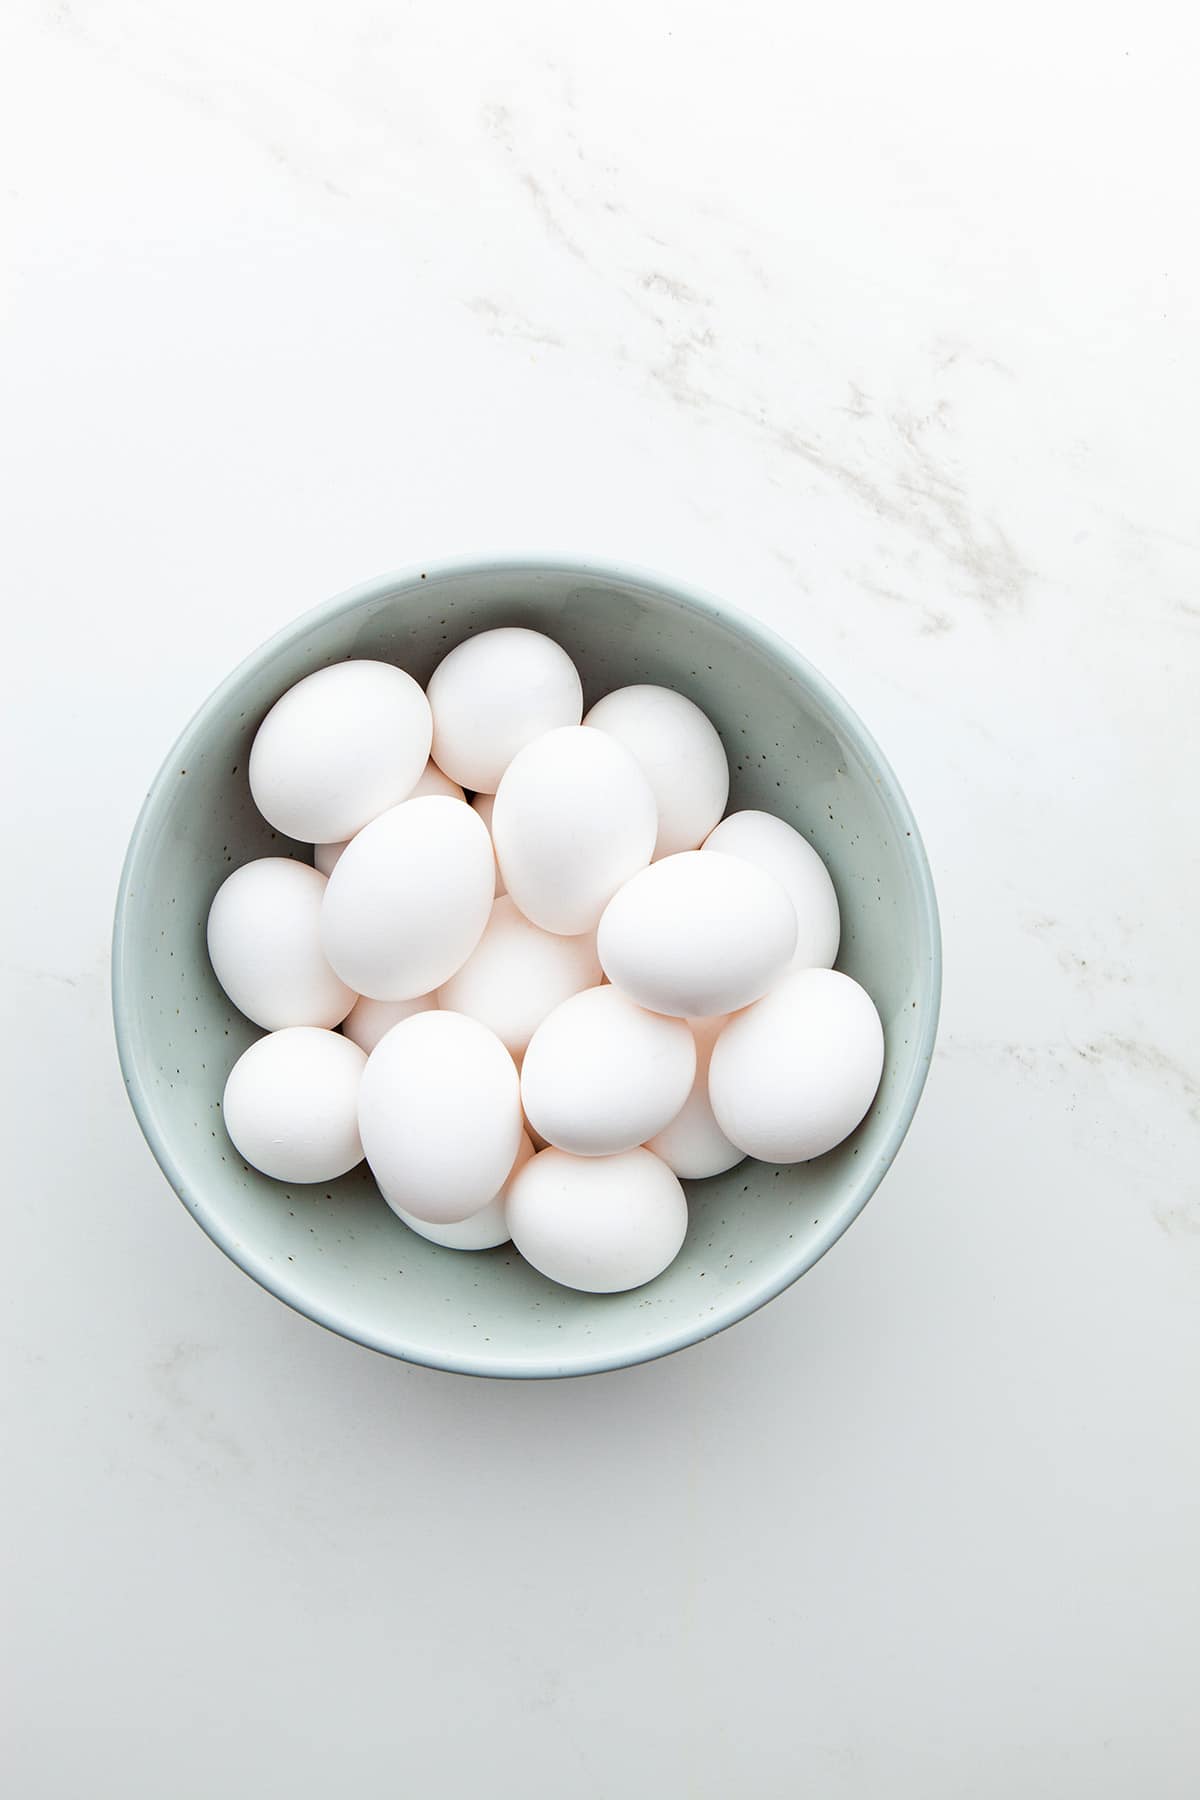 A light blue bowl filled with eggs on a marble surface.